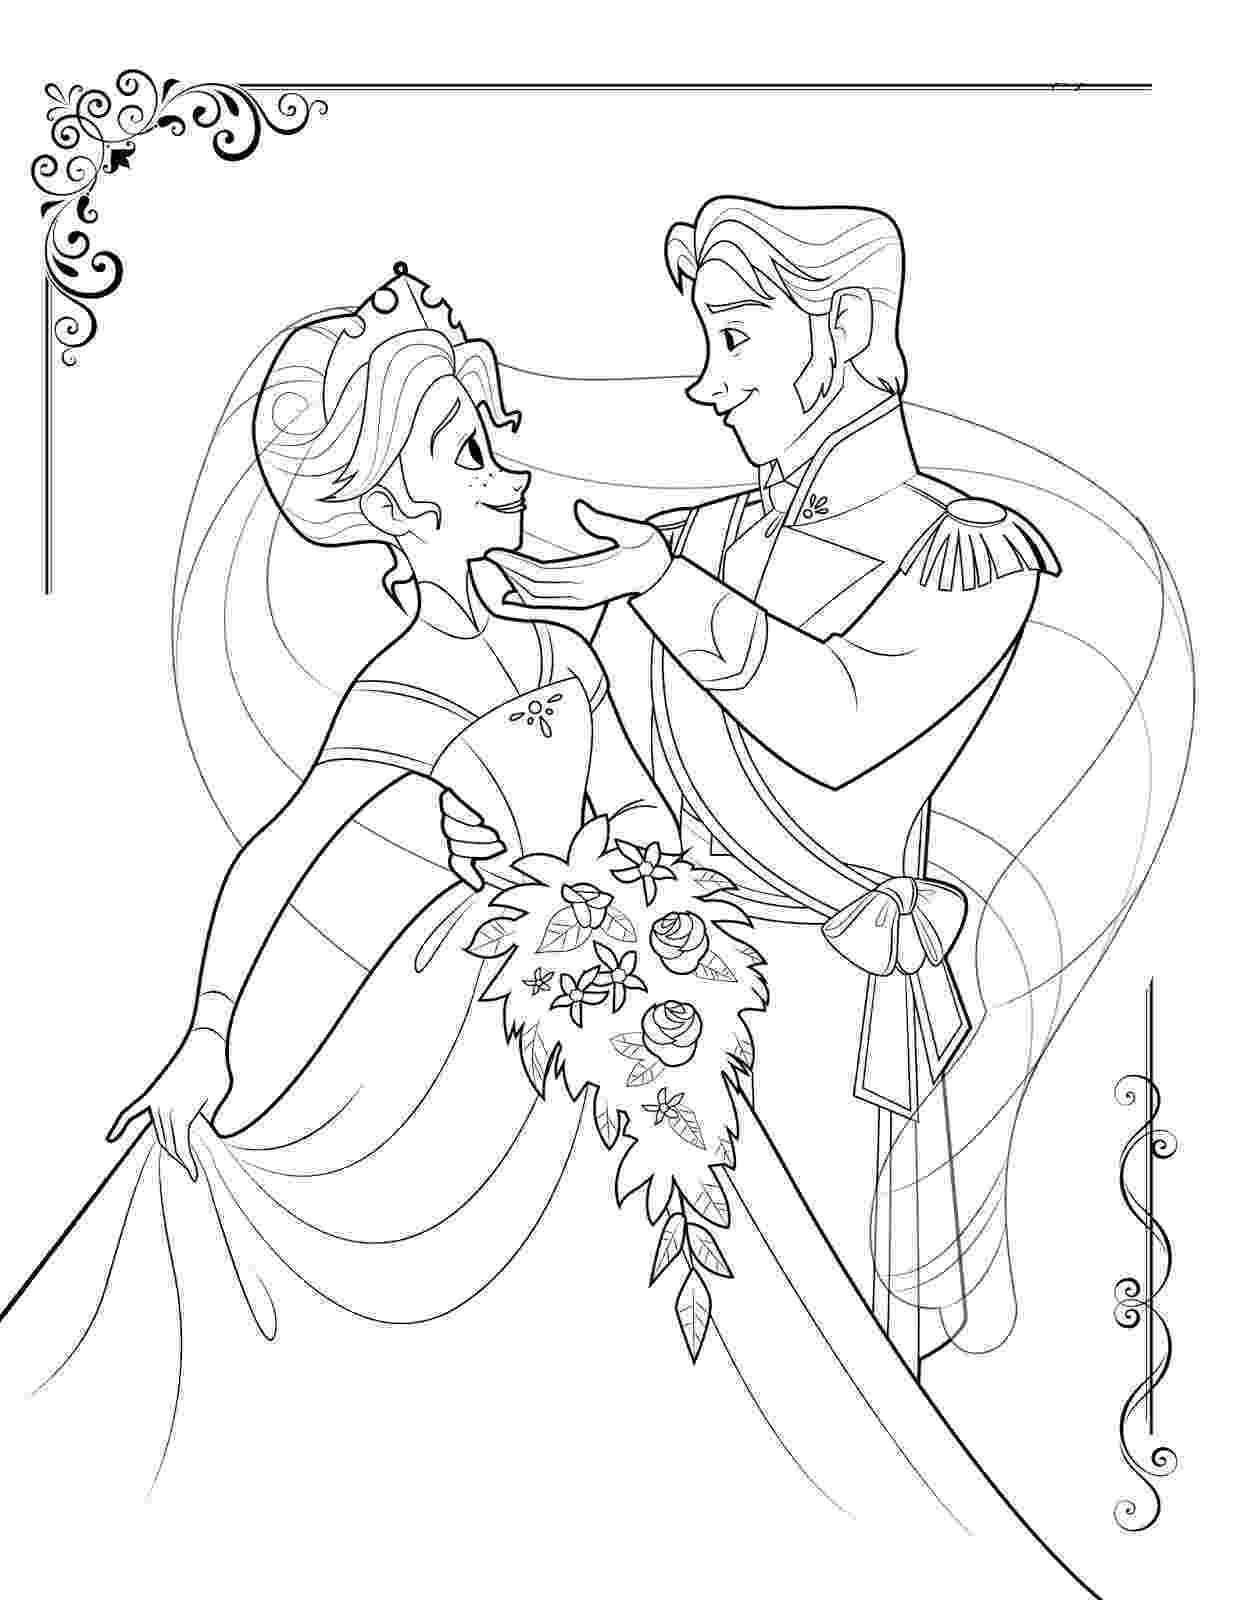 frozen characters coloring pages frozen to color for children frozen kids coloring pages coloring frozen pages characters 